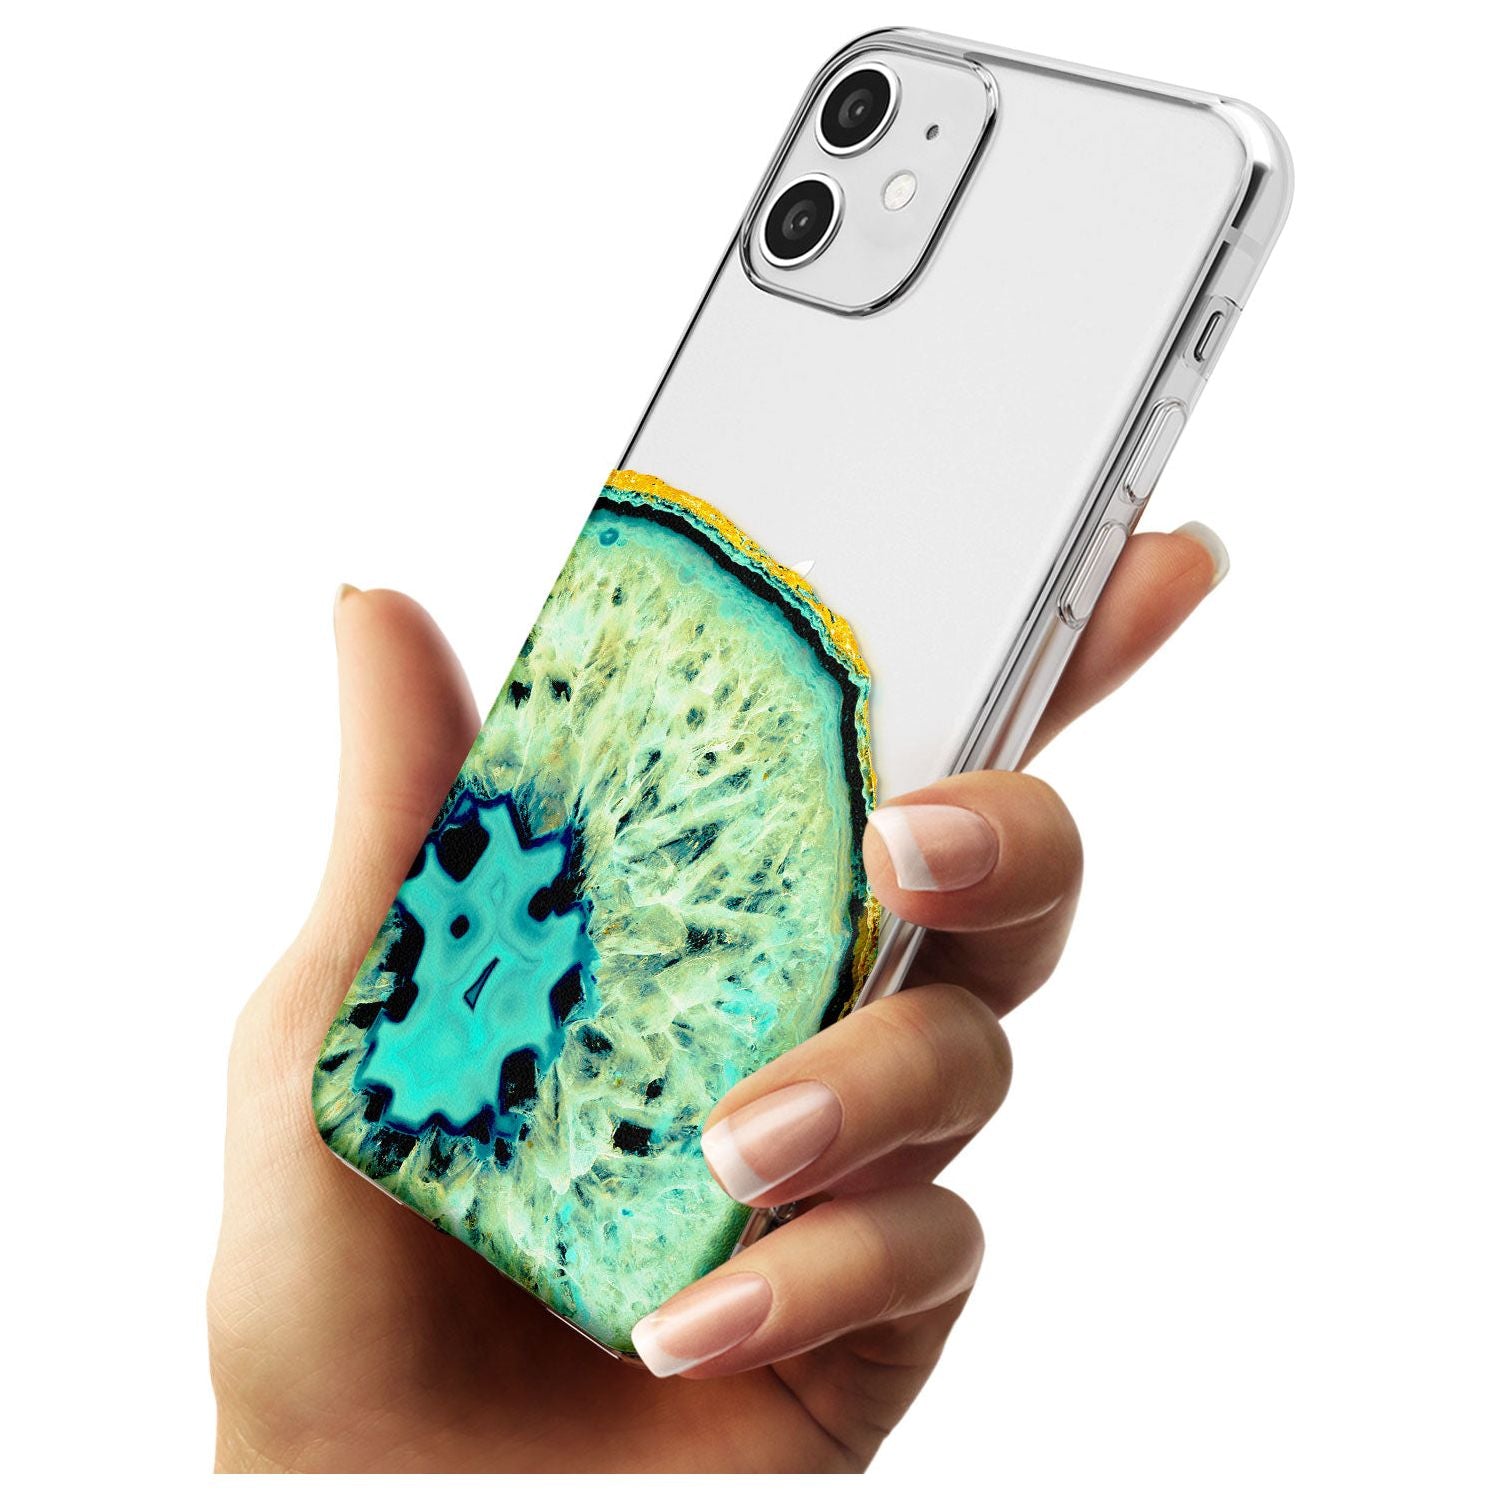 Turquoise & Green Gemstone Crystal Clear Design Slim TPU Phone Case for iPhone 11